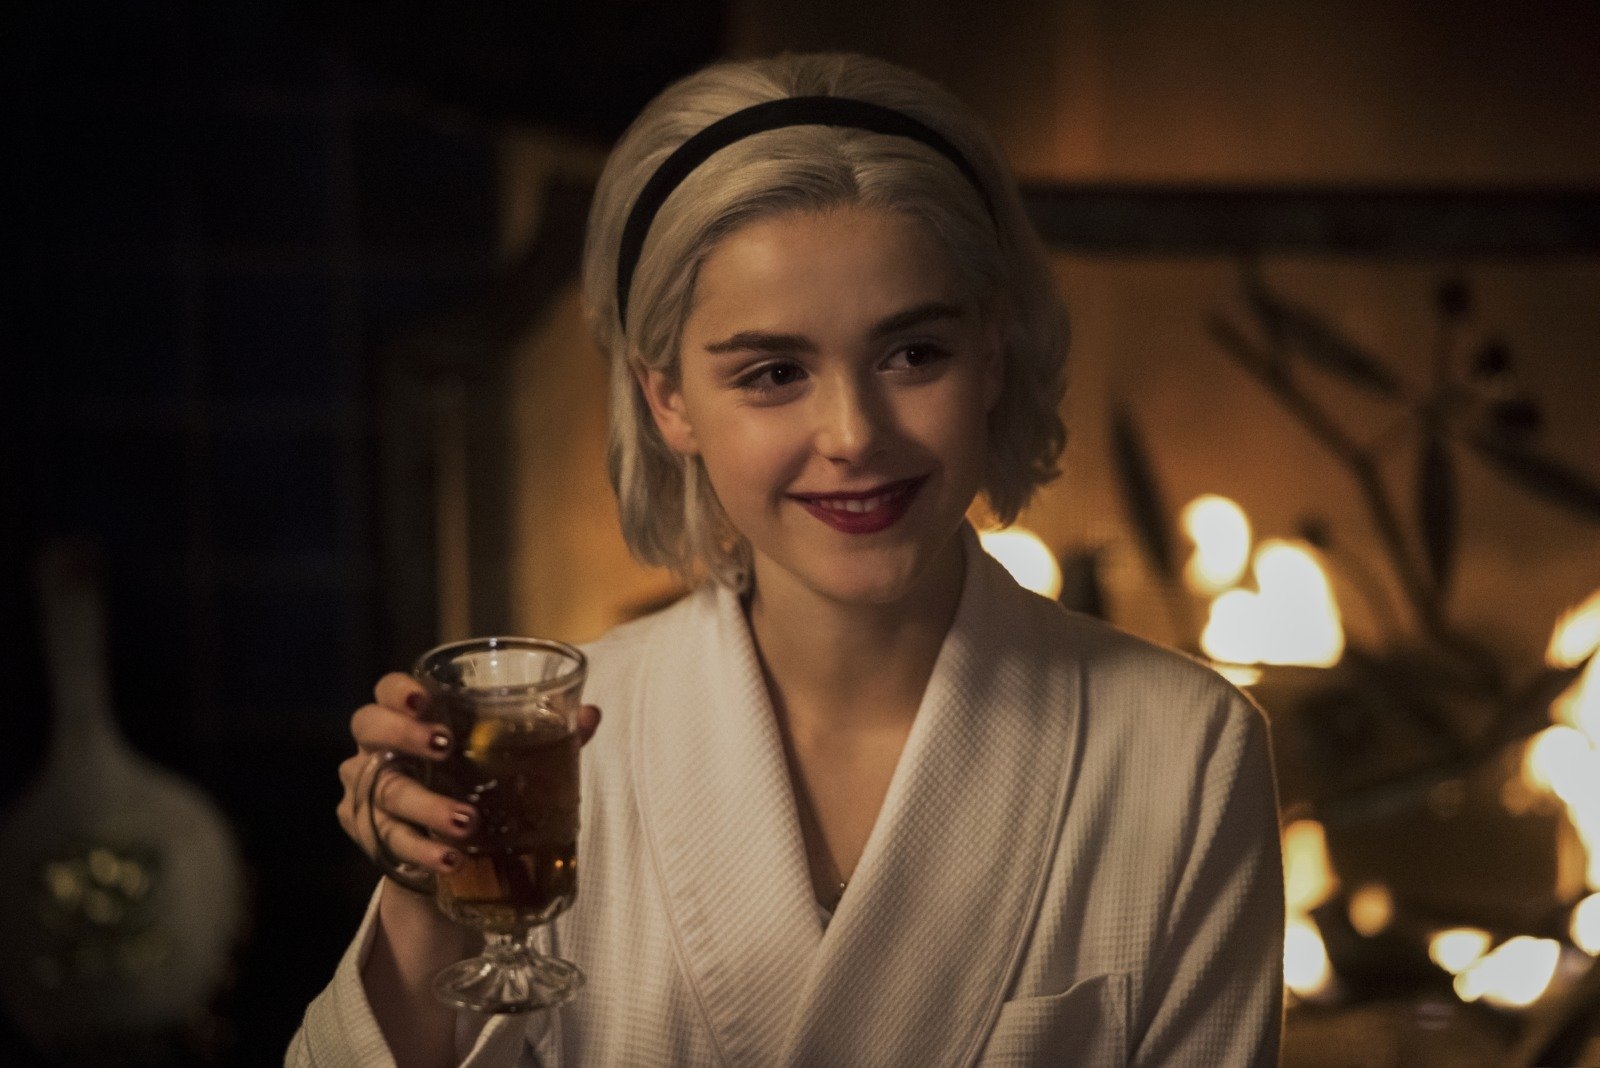 Netflix's 'Sabrina' holiday special trailer brings cheer and demons | DeviceDaily.com